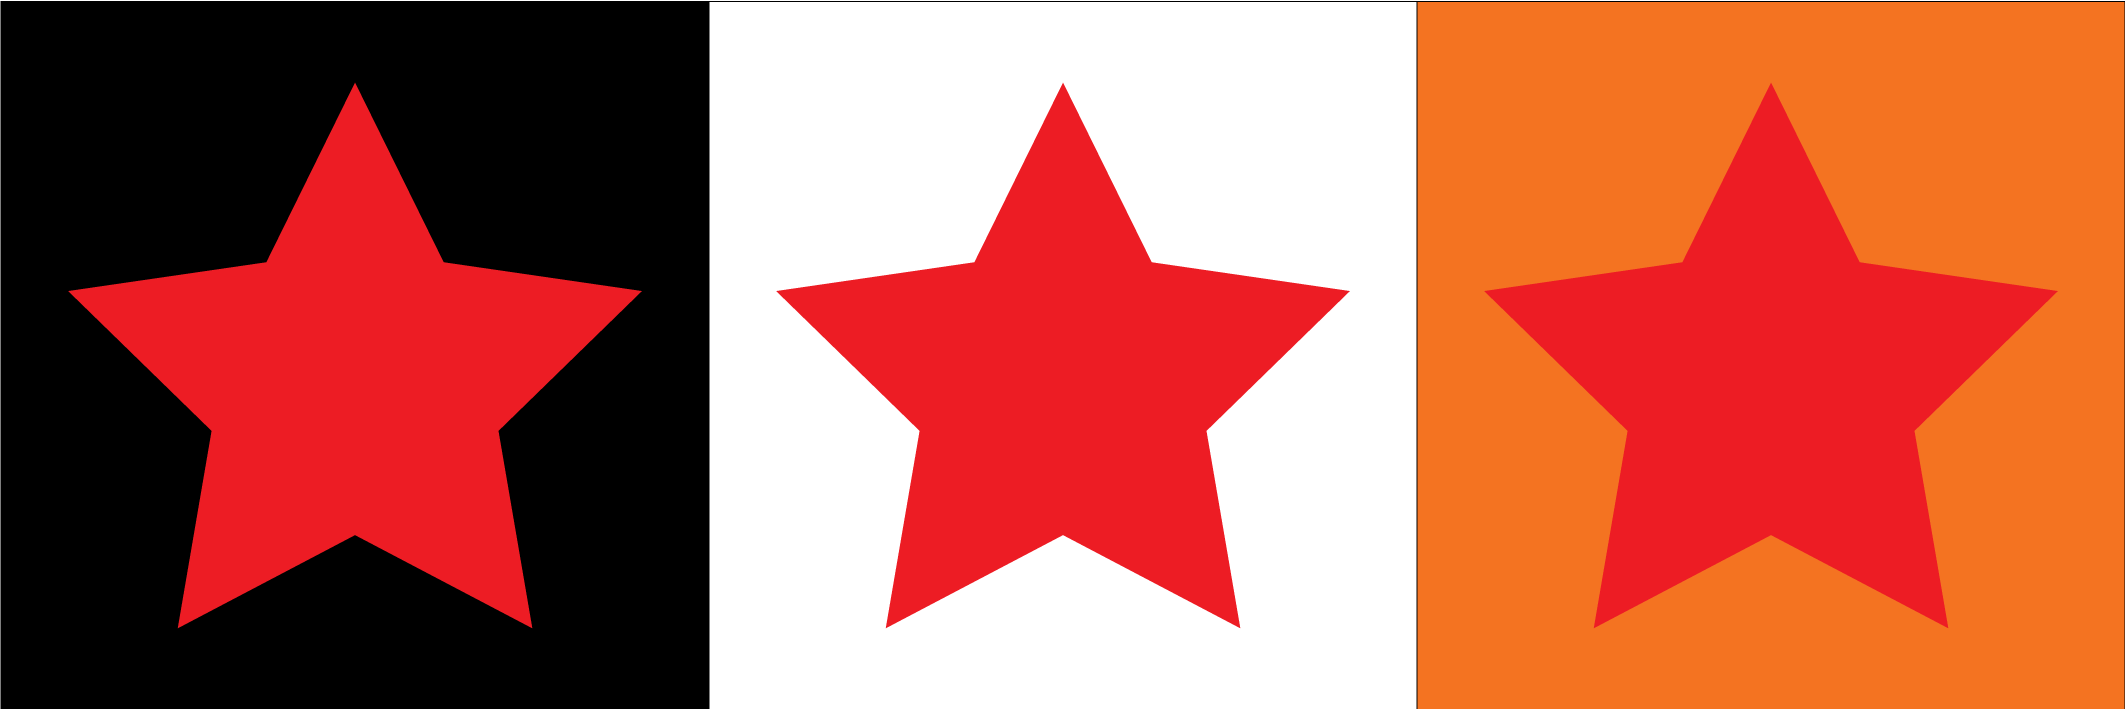 Red Orange Star Logo - The Importance of Color in Advertising and Design | Advertising Vehicles